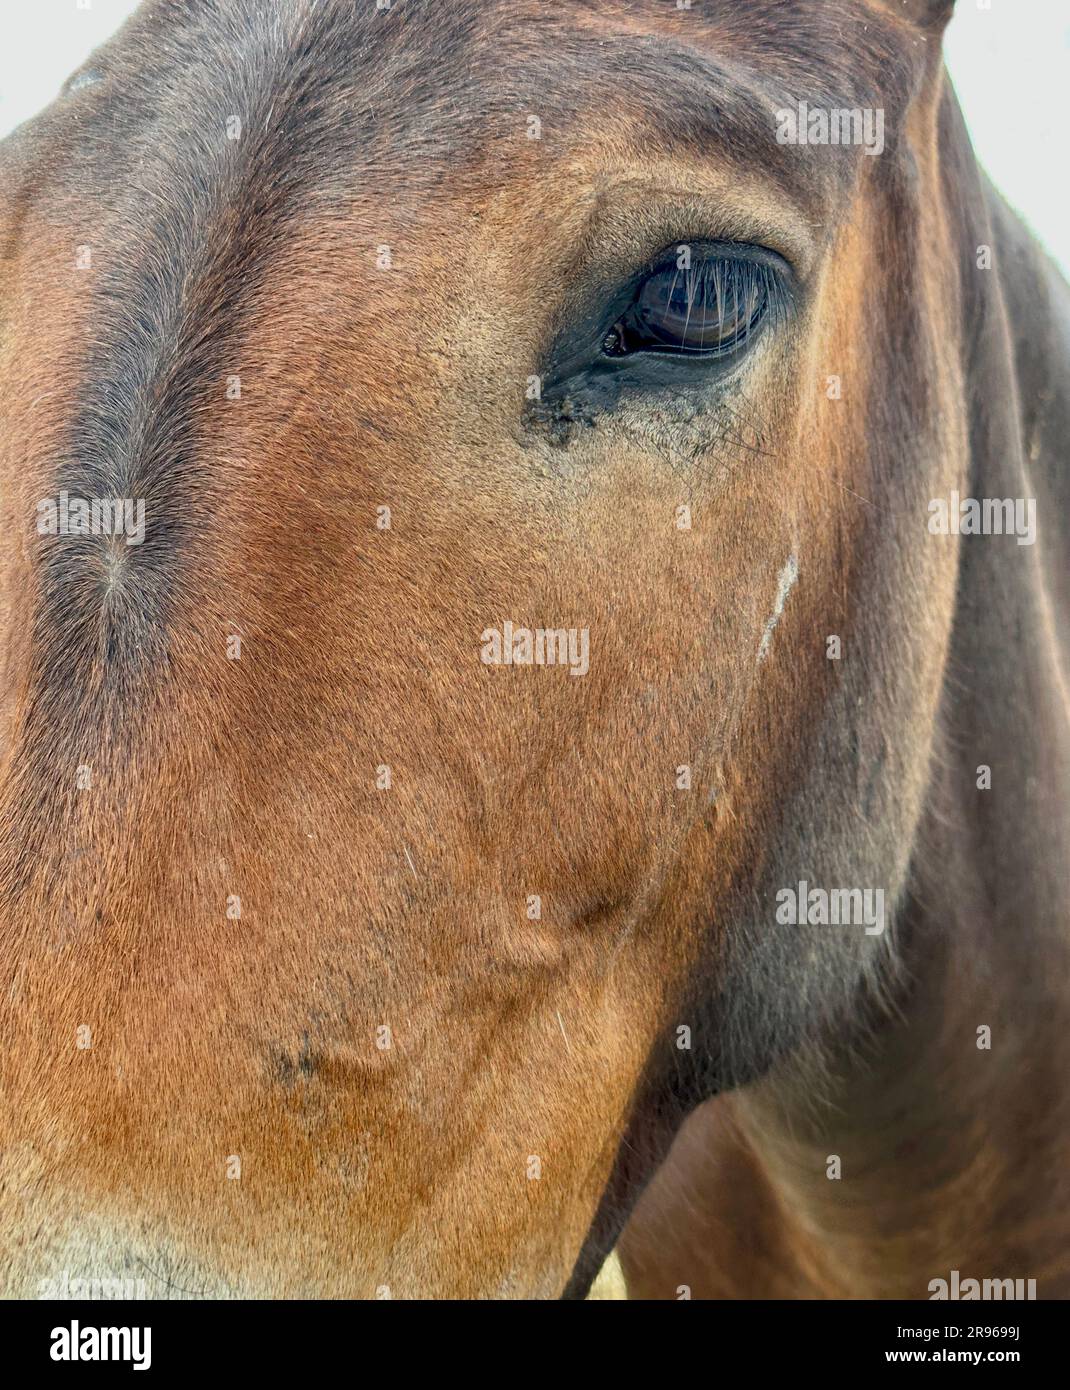 The eye closeup of a mule shows eyelashes with a brown eye color & a patient gentle look as the animal faces out to the camera. Horse family animal. Stock Photo